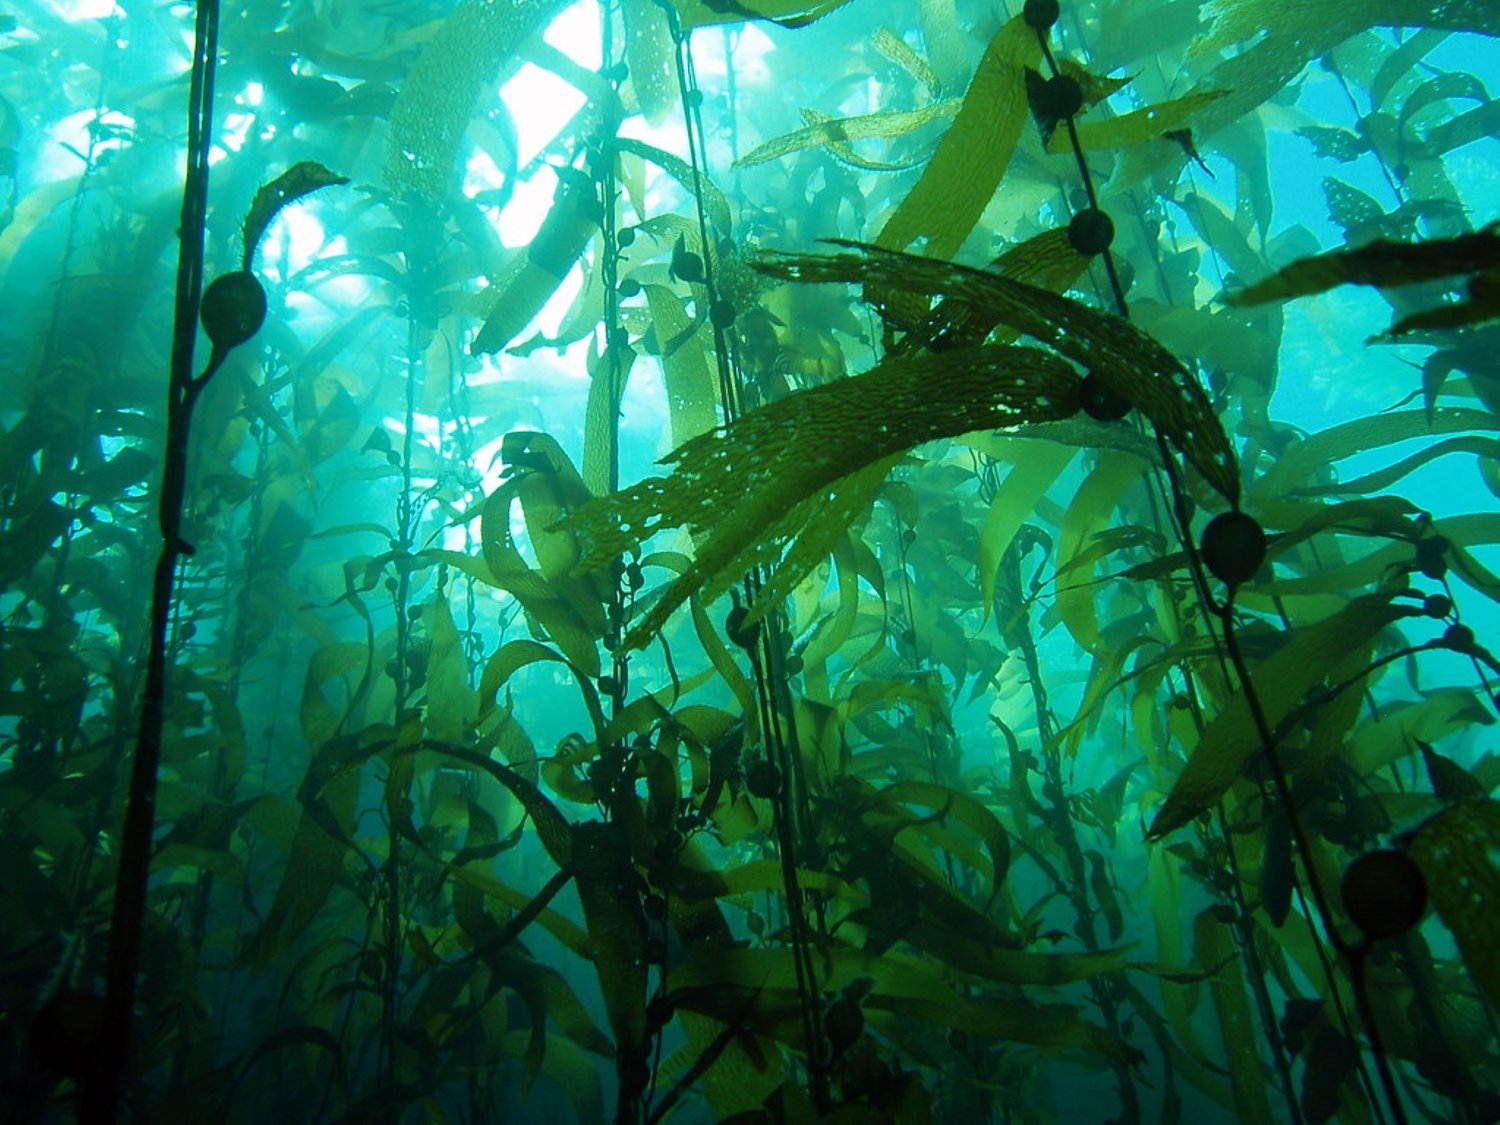 Sugar kelp are seeded in a land based nurser, and then placed in marine waters to grow out.